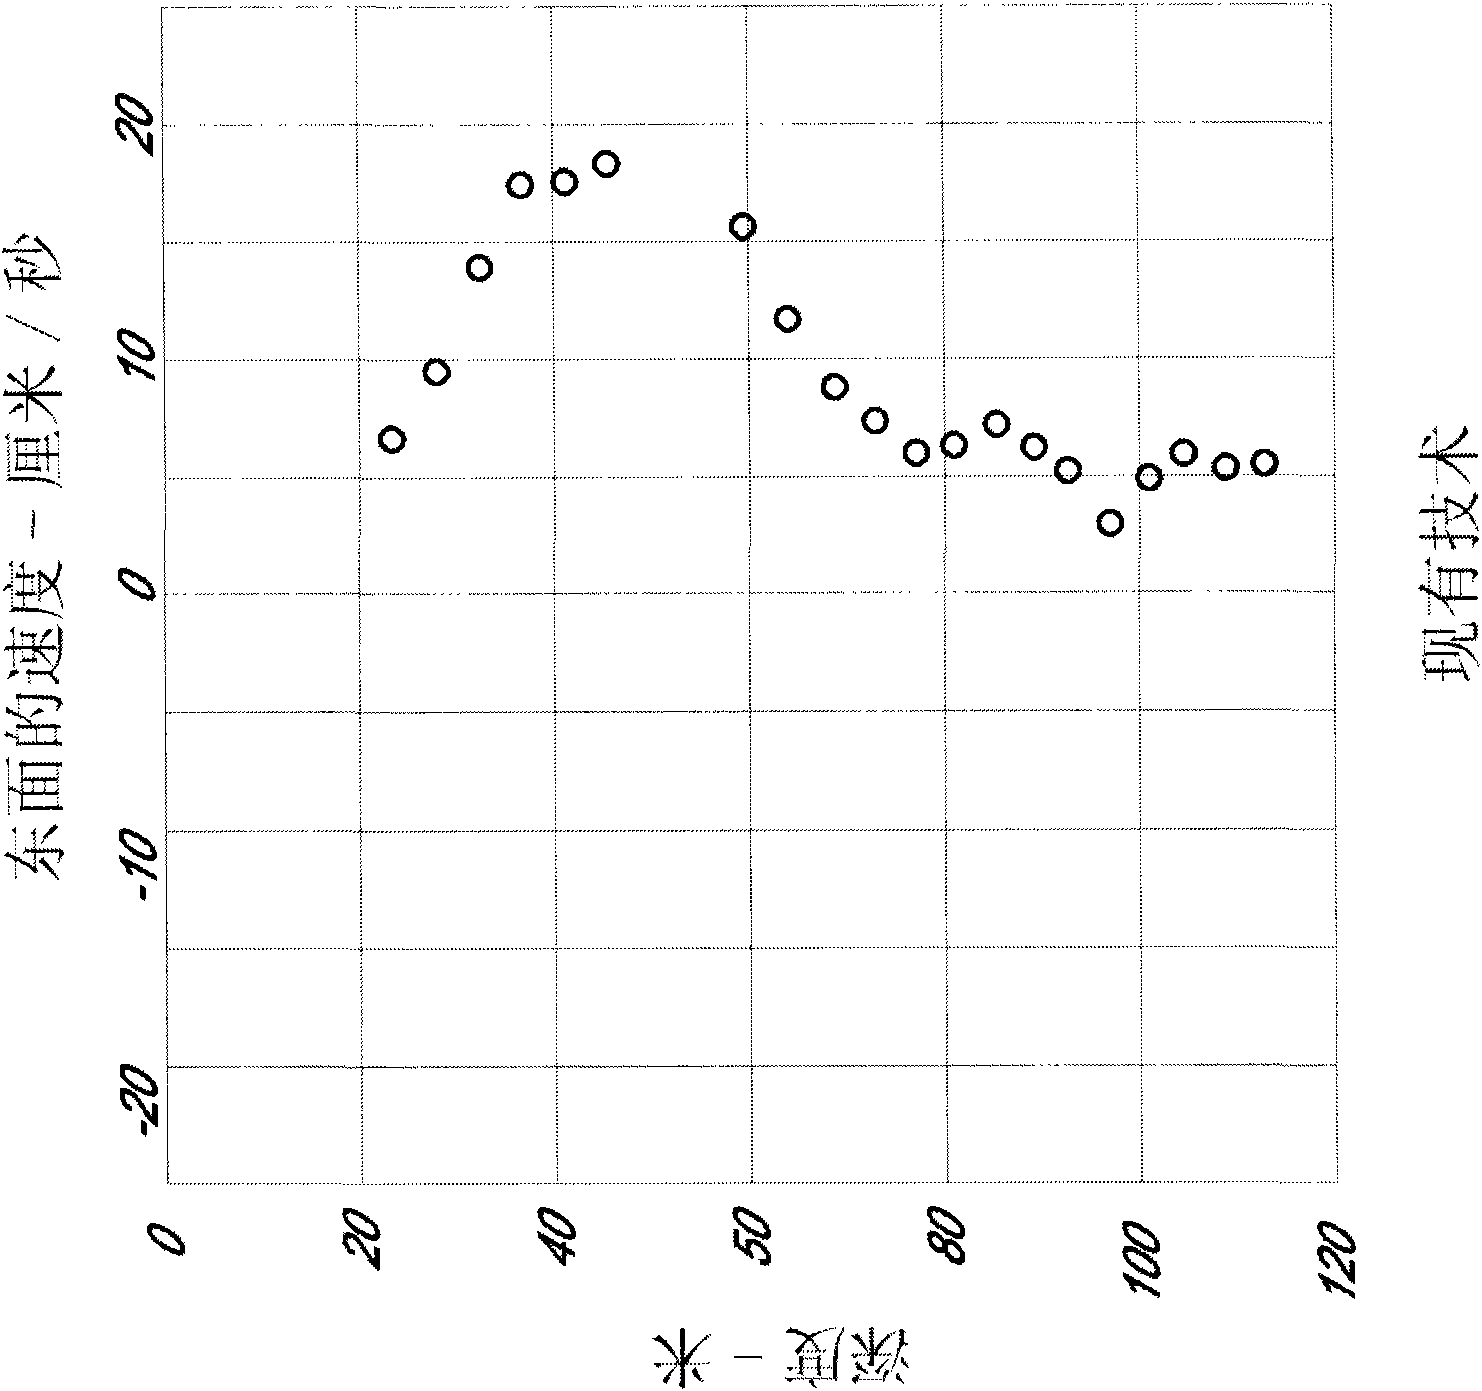 System and method for acoustic doppler velocity processing with a phased array transducer